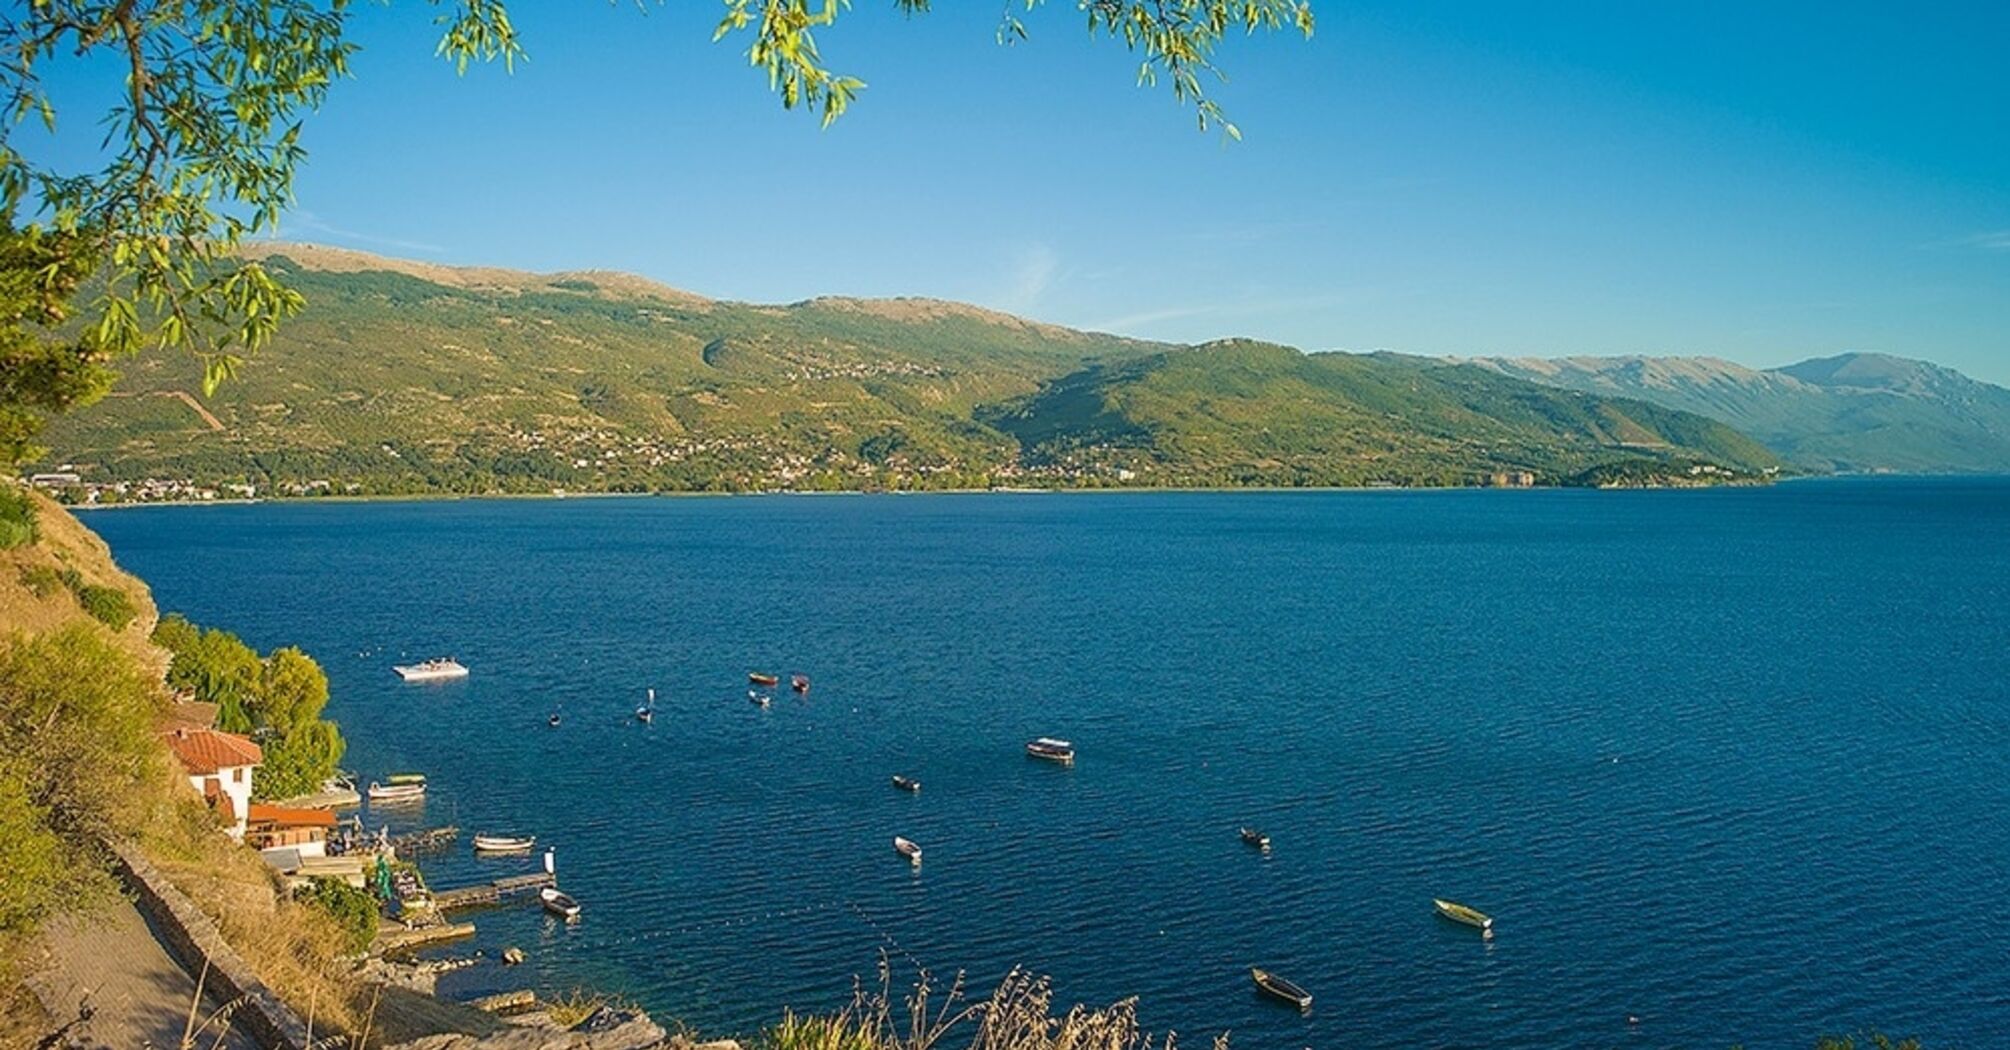 Lake Ohrid: What tourists need to know about one of the most underrated places in Europe